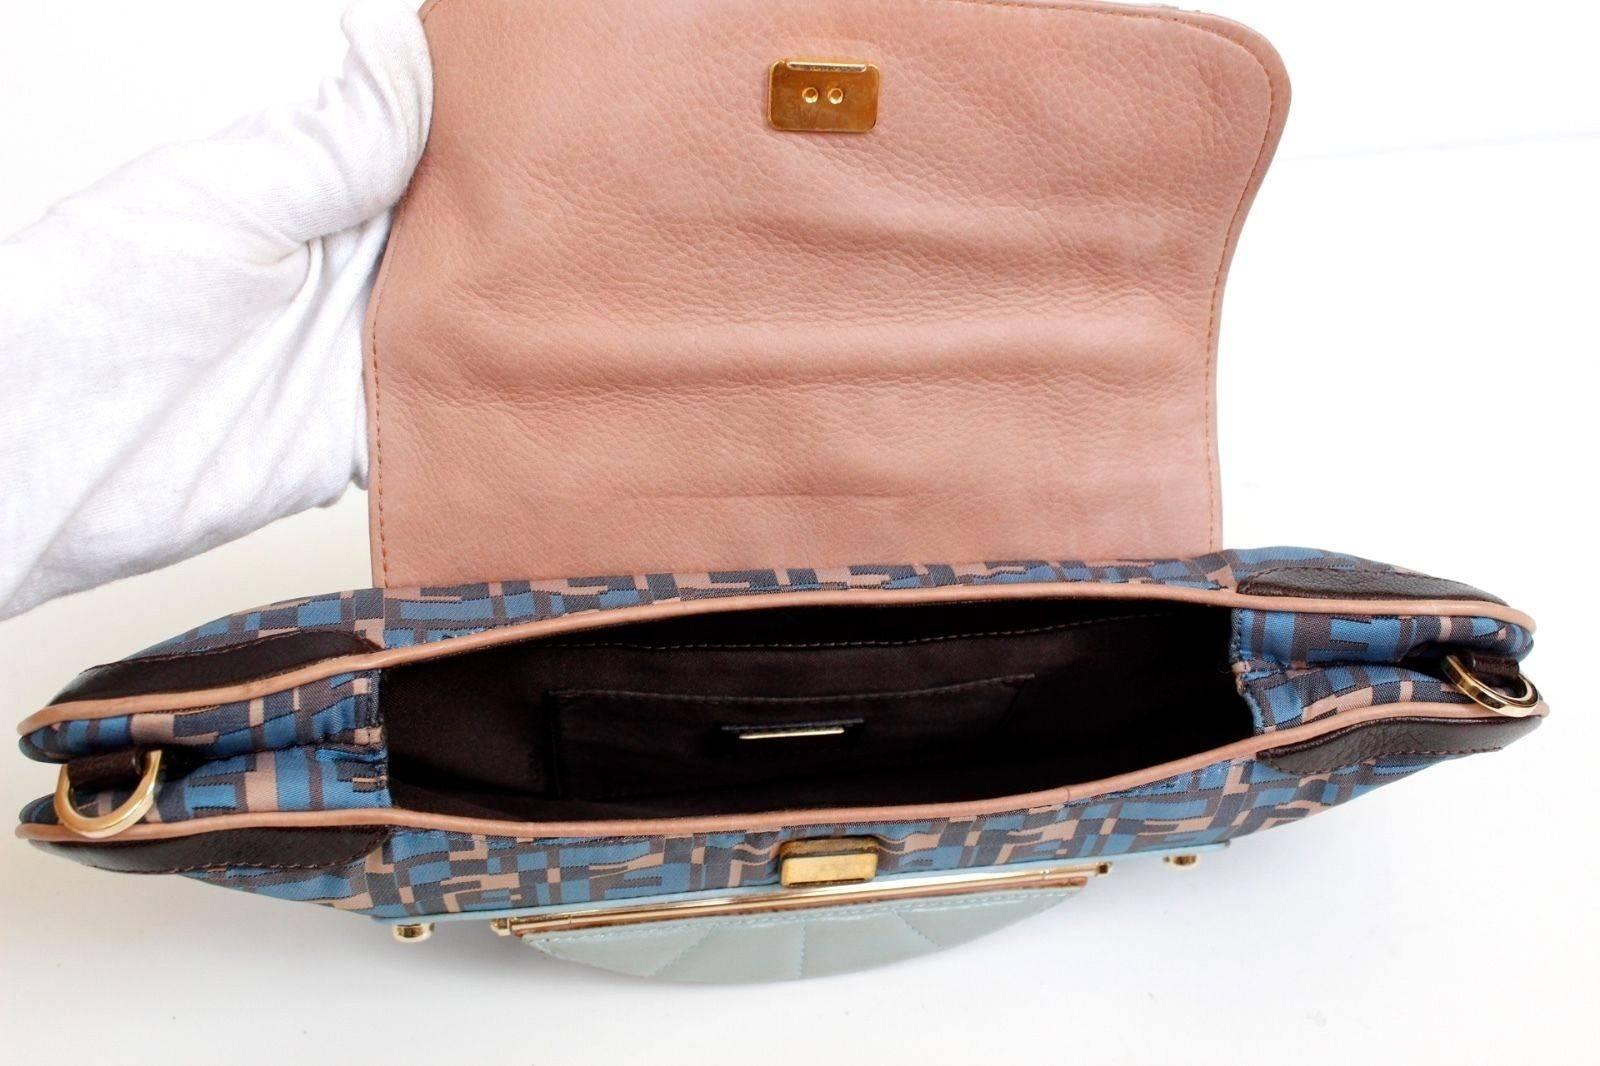 FENDI Blue Pink Leather Zucca Vanity Clutch Bag  In Excellent Condition For Sale In London, GB